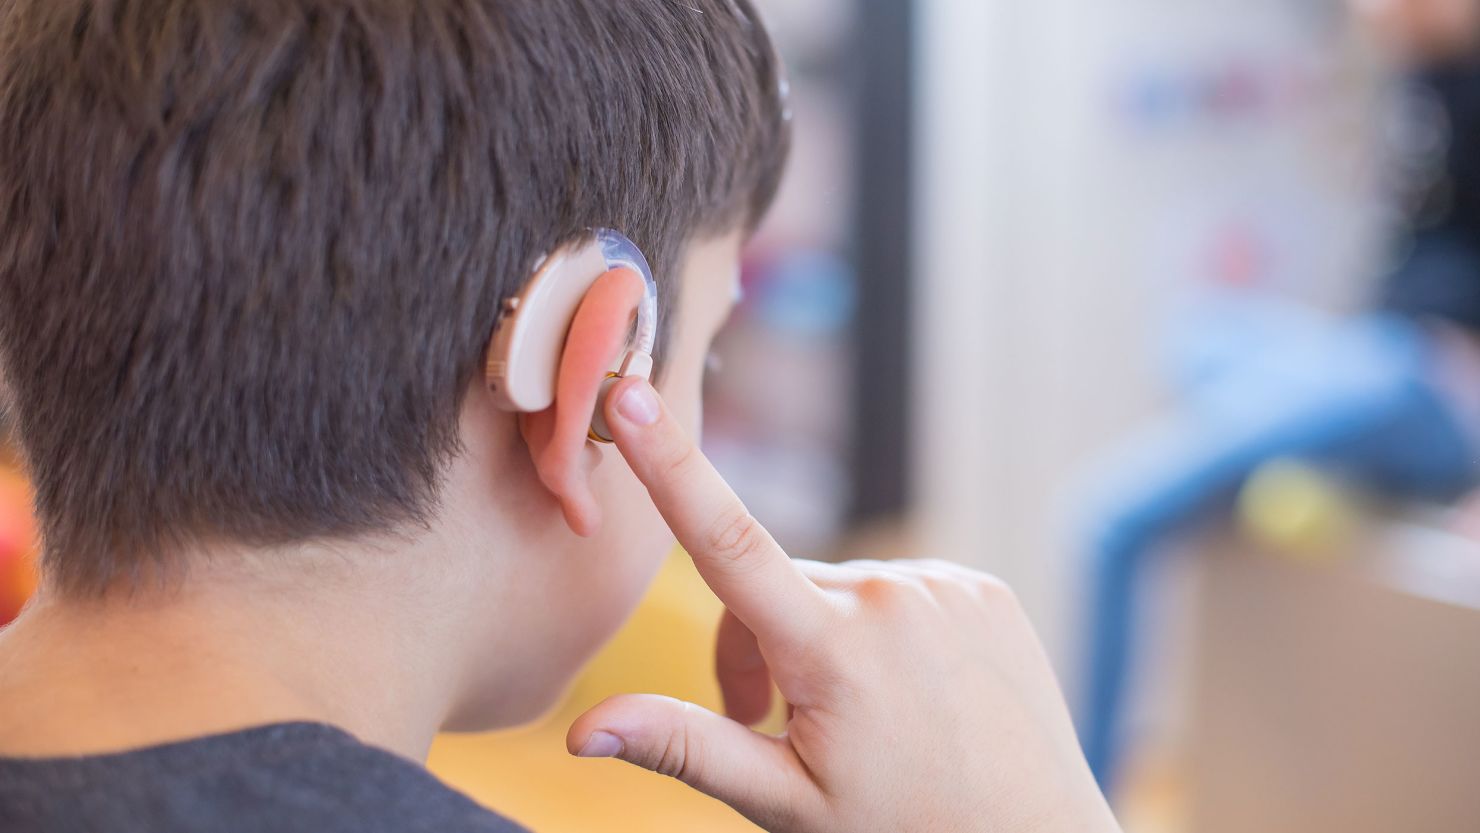 Although many children need hearing aids, they're not always covered by medical insurance.